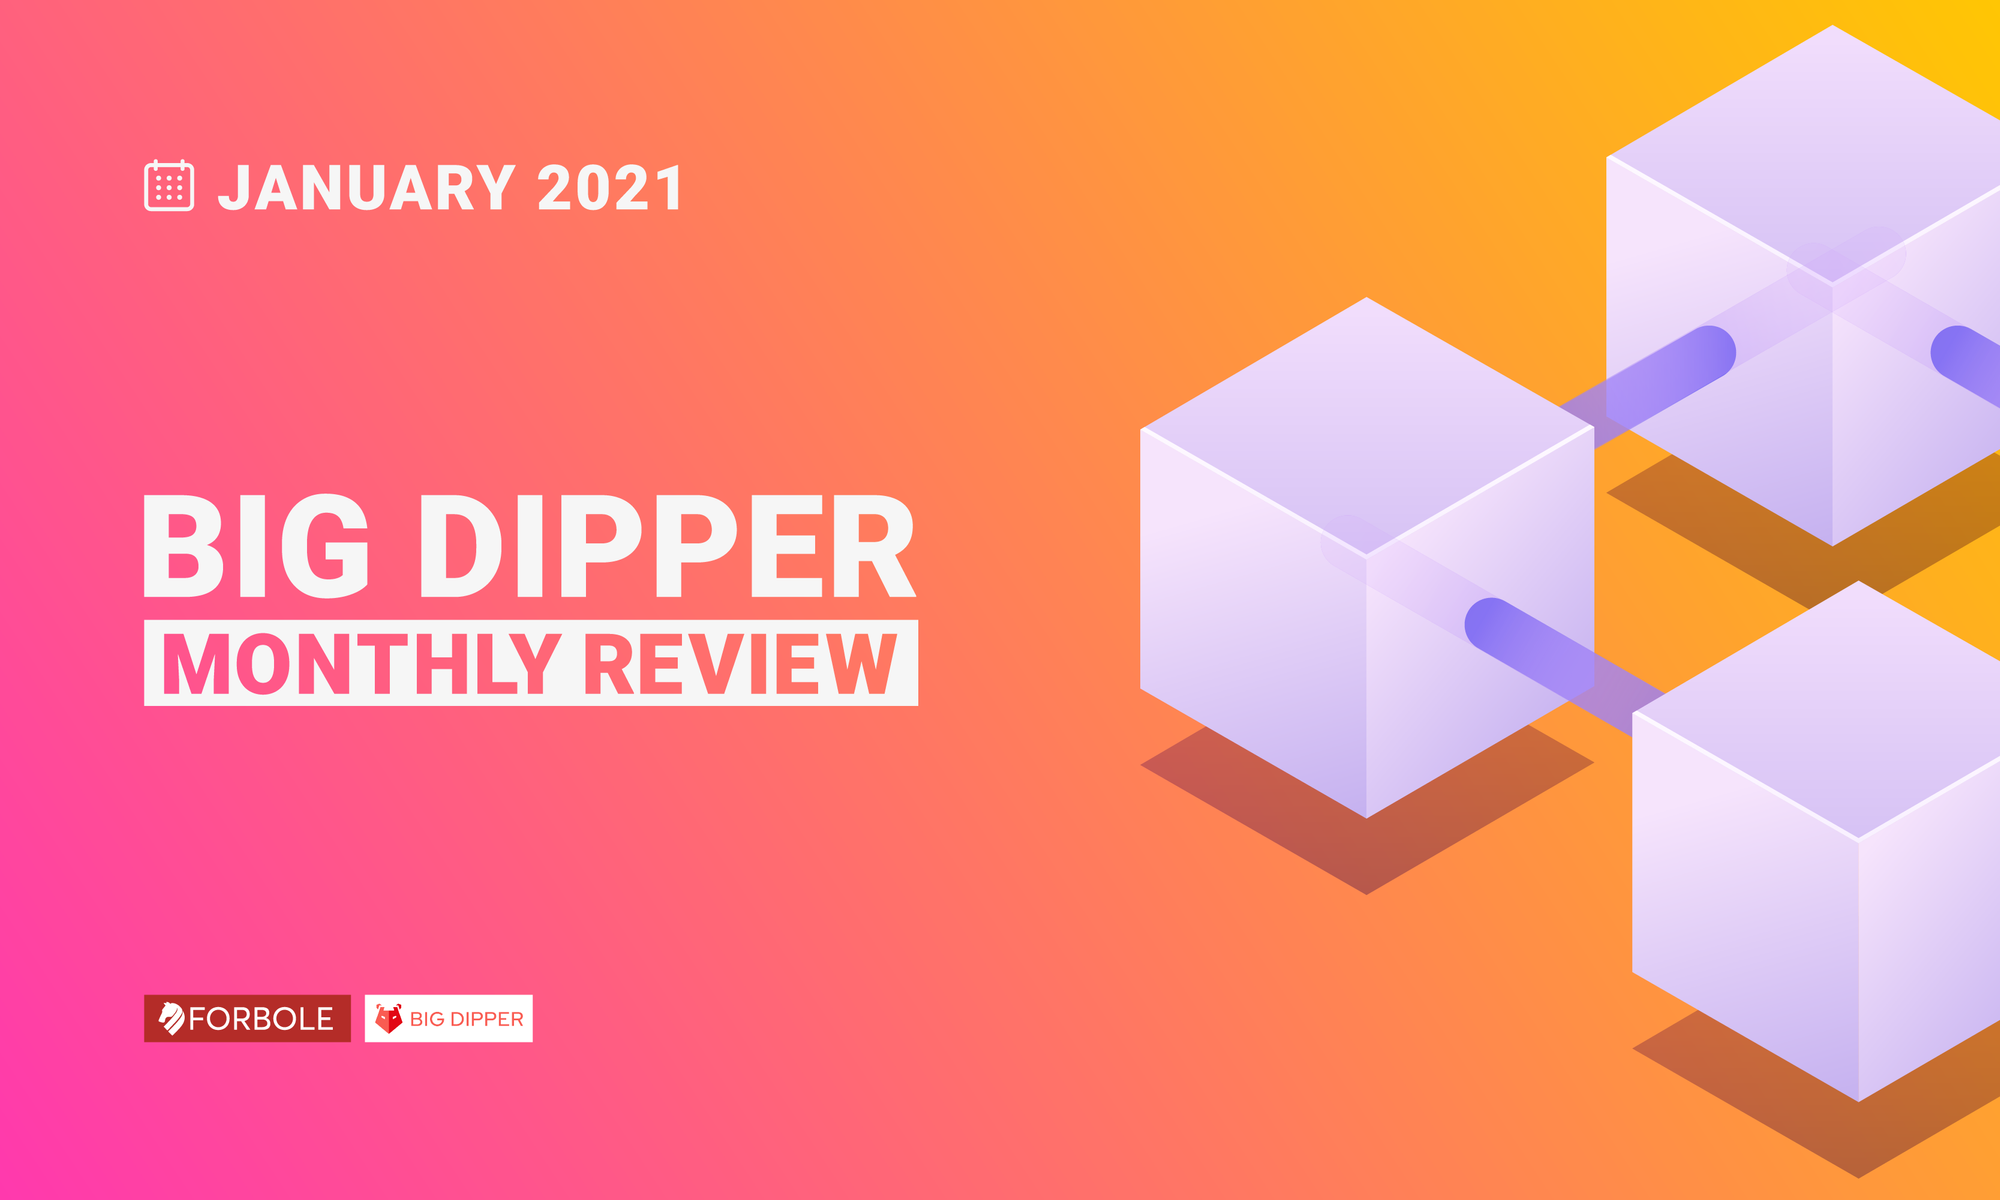 Big Dipper Monthly Review - January 2021